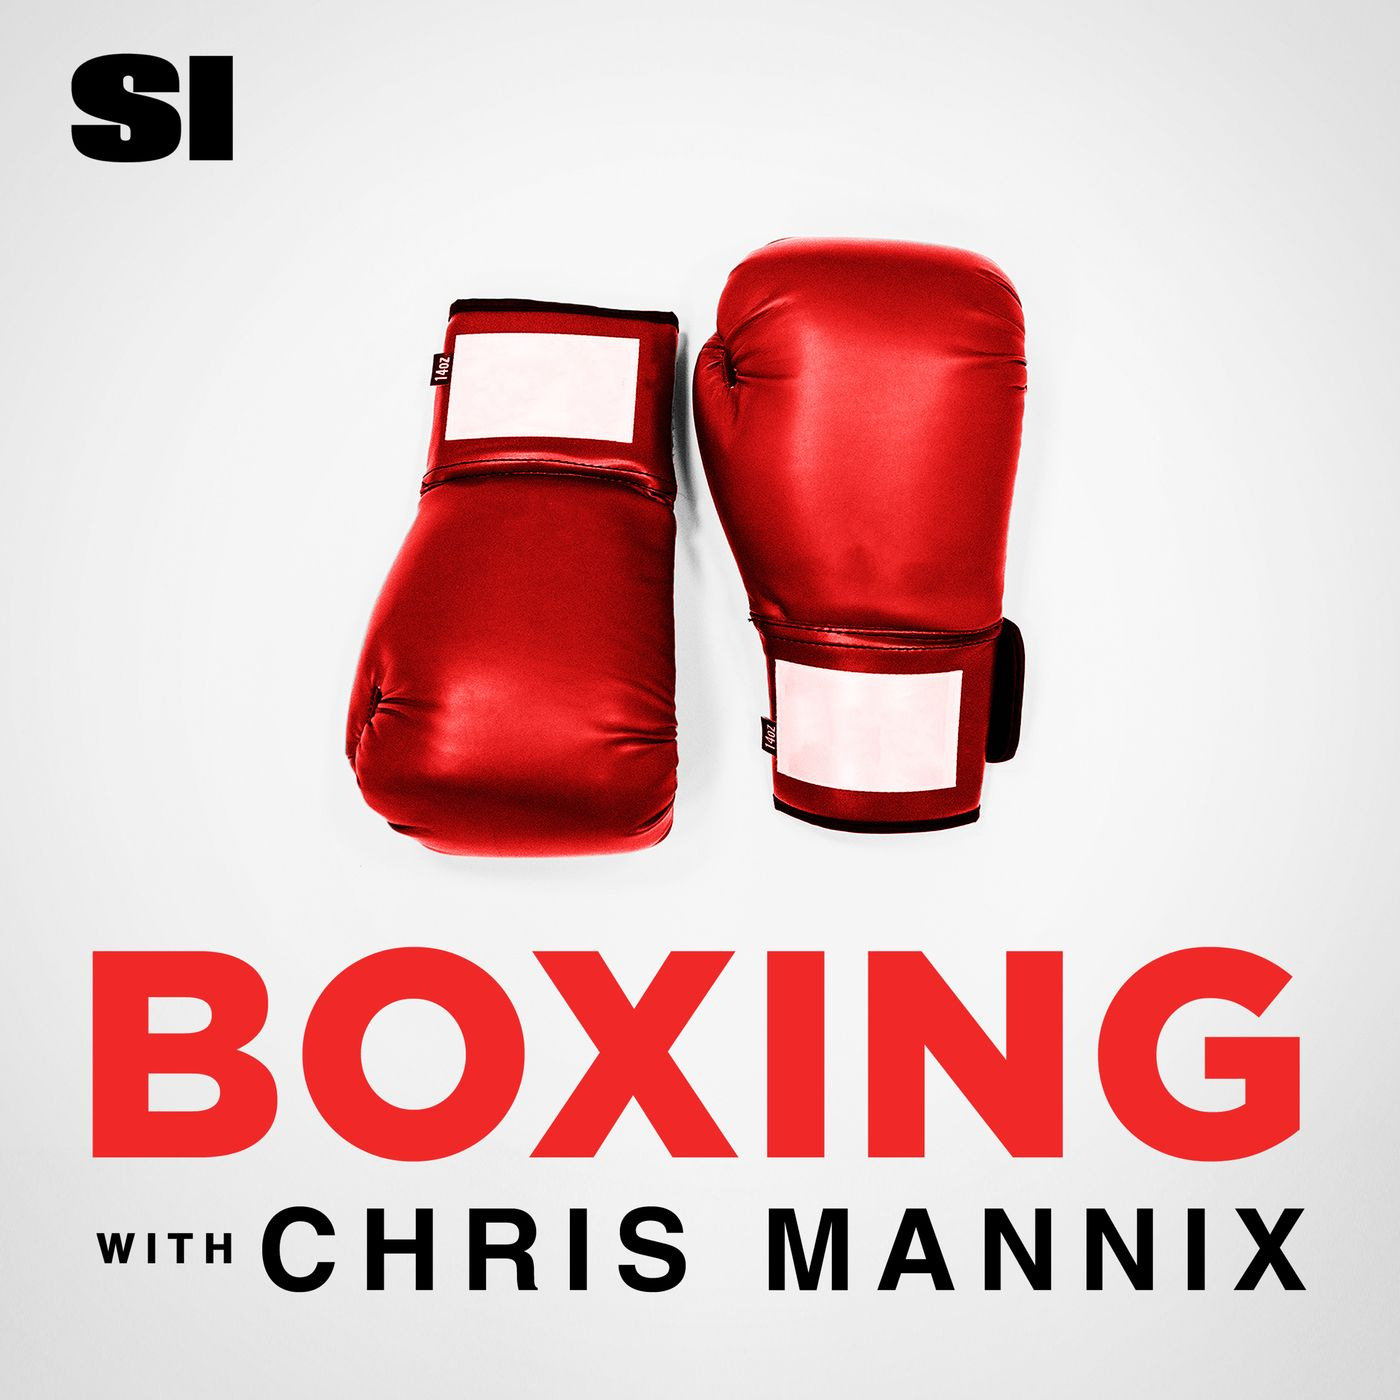 A highlight from 3 Points with Chris Mannix - Jason Timpf joins the show